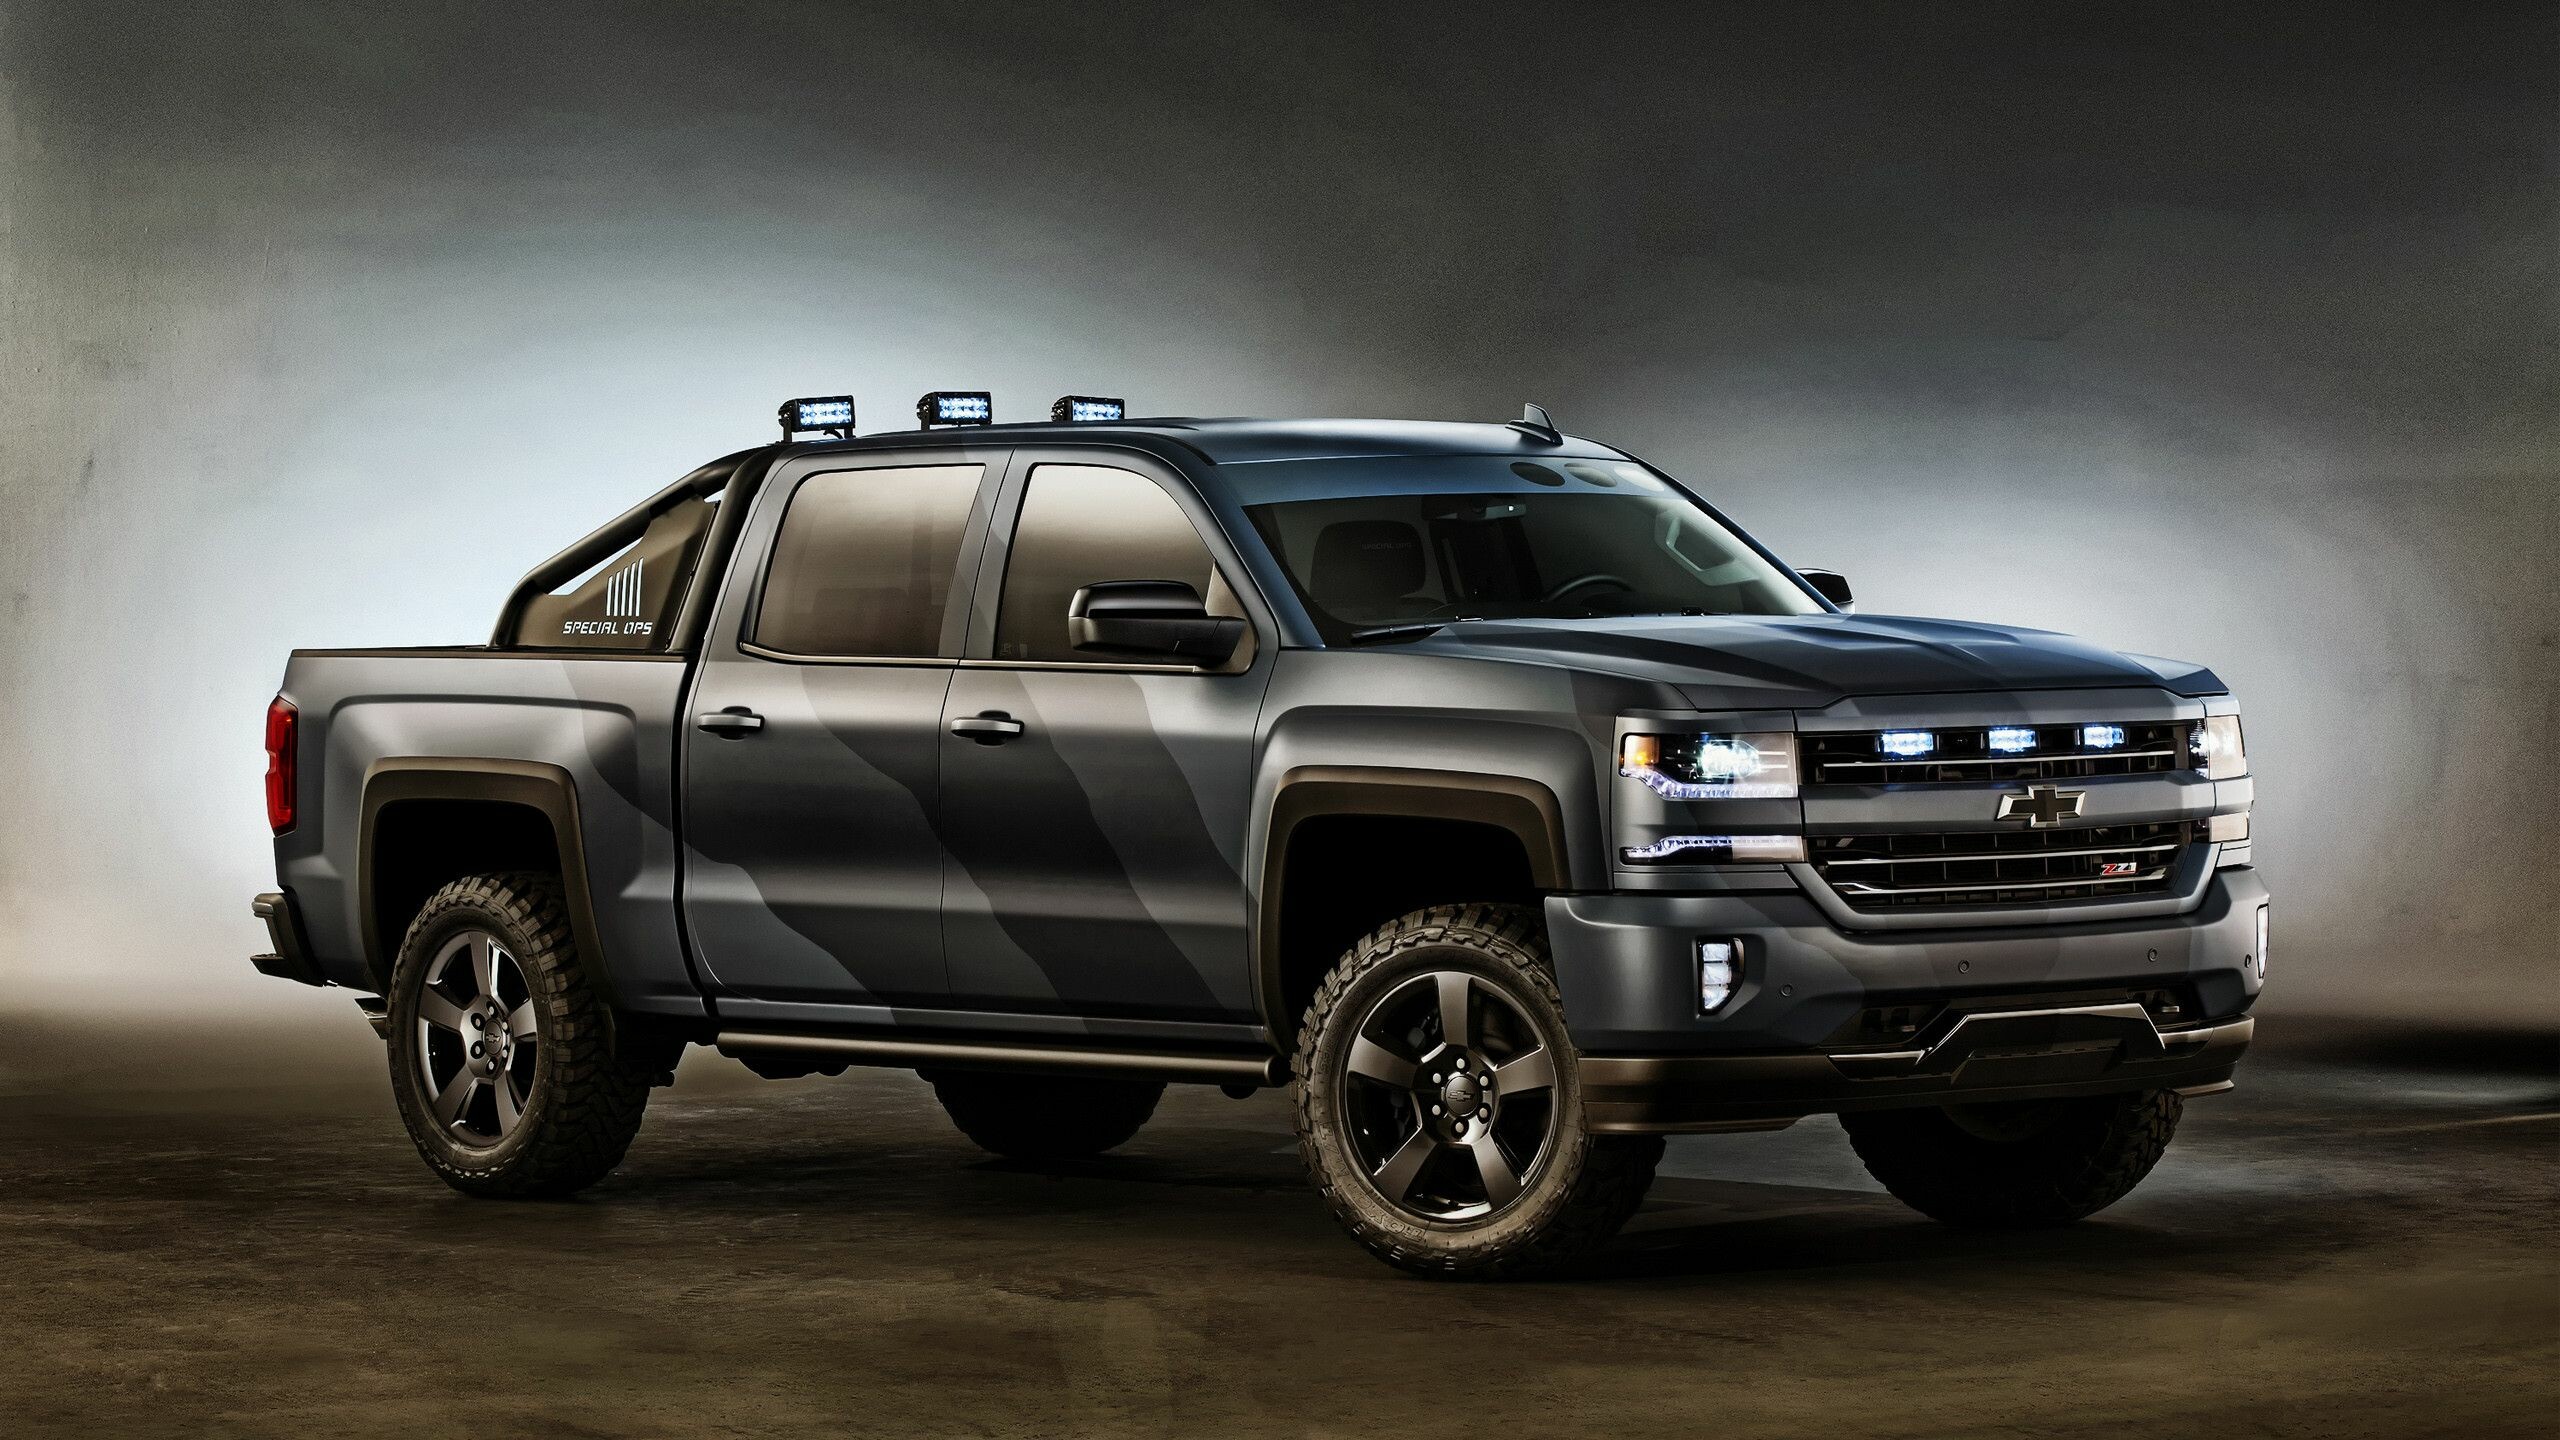 Chevrolet Silverado: A full-sized pickup truck that entered production for the 1999 model year. 2560x1440 HD Wallpaper.